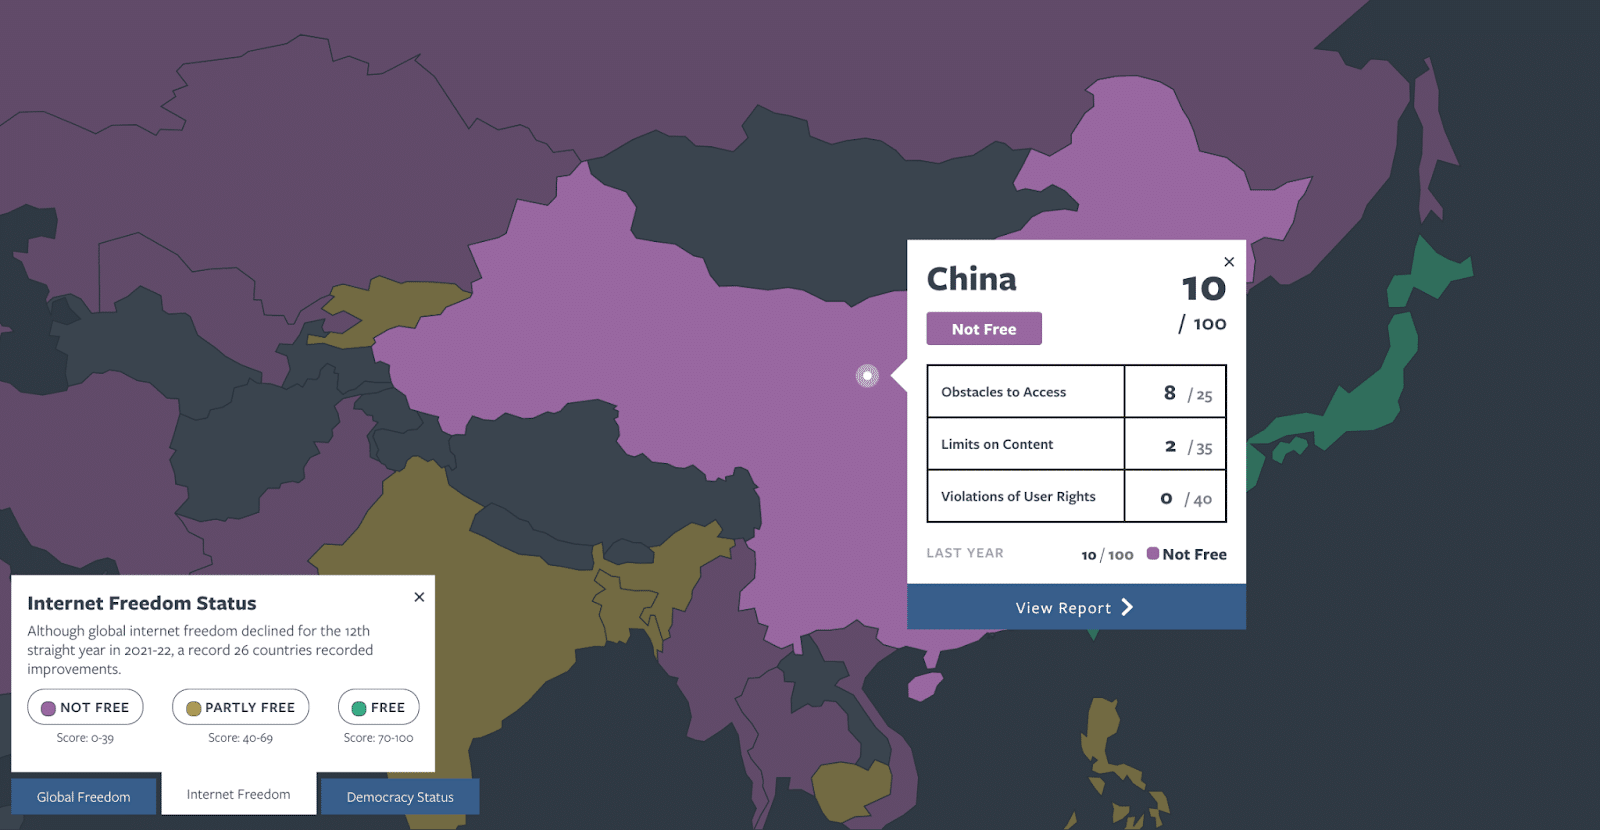 The state of Internet freedom in China.